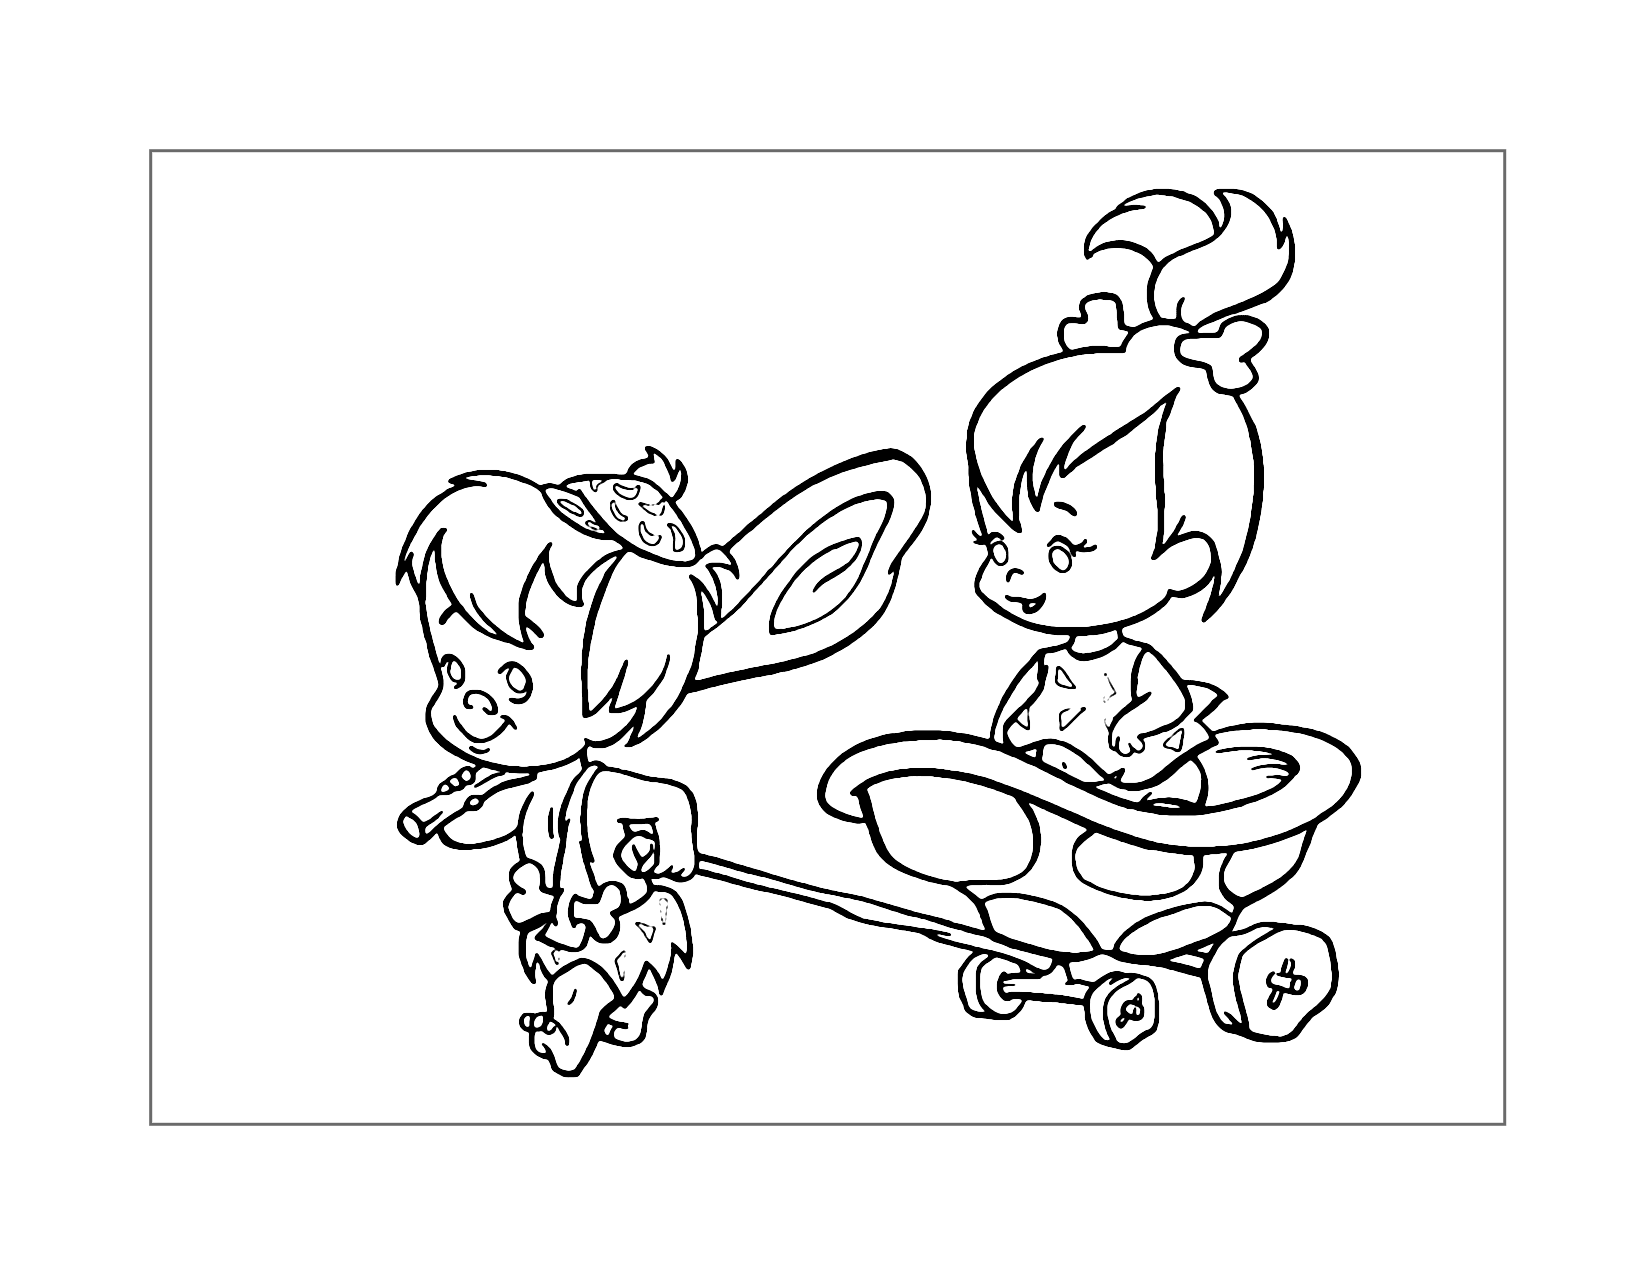 Pebbles And Bam Bam Coloring Pages